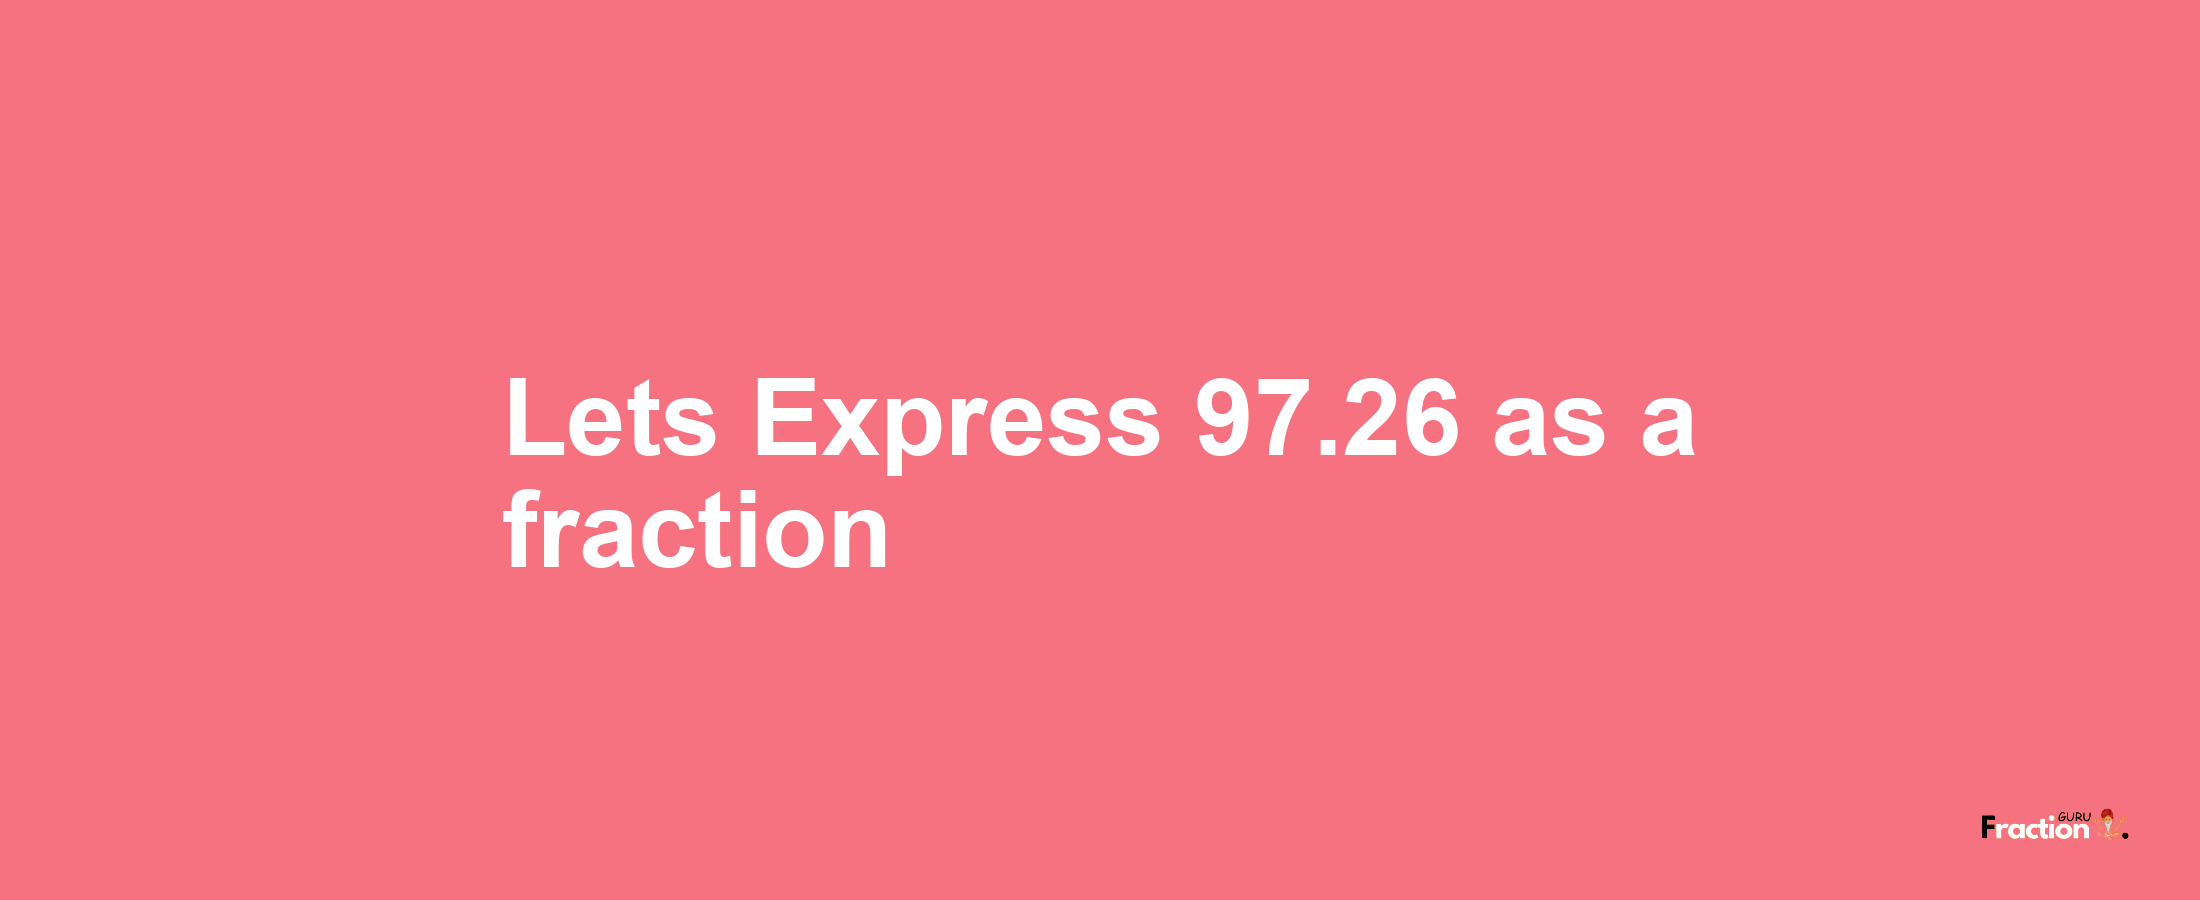 Lets Express 97.26 as afraction